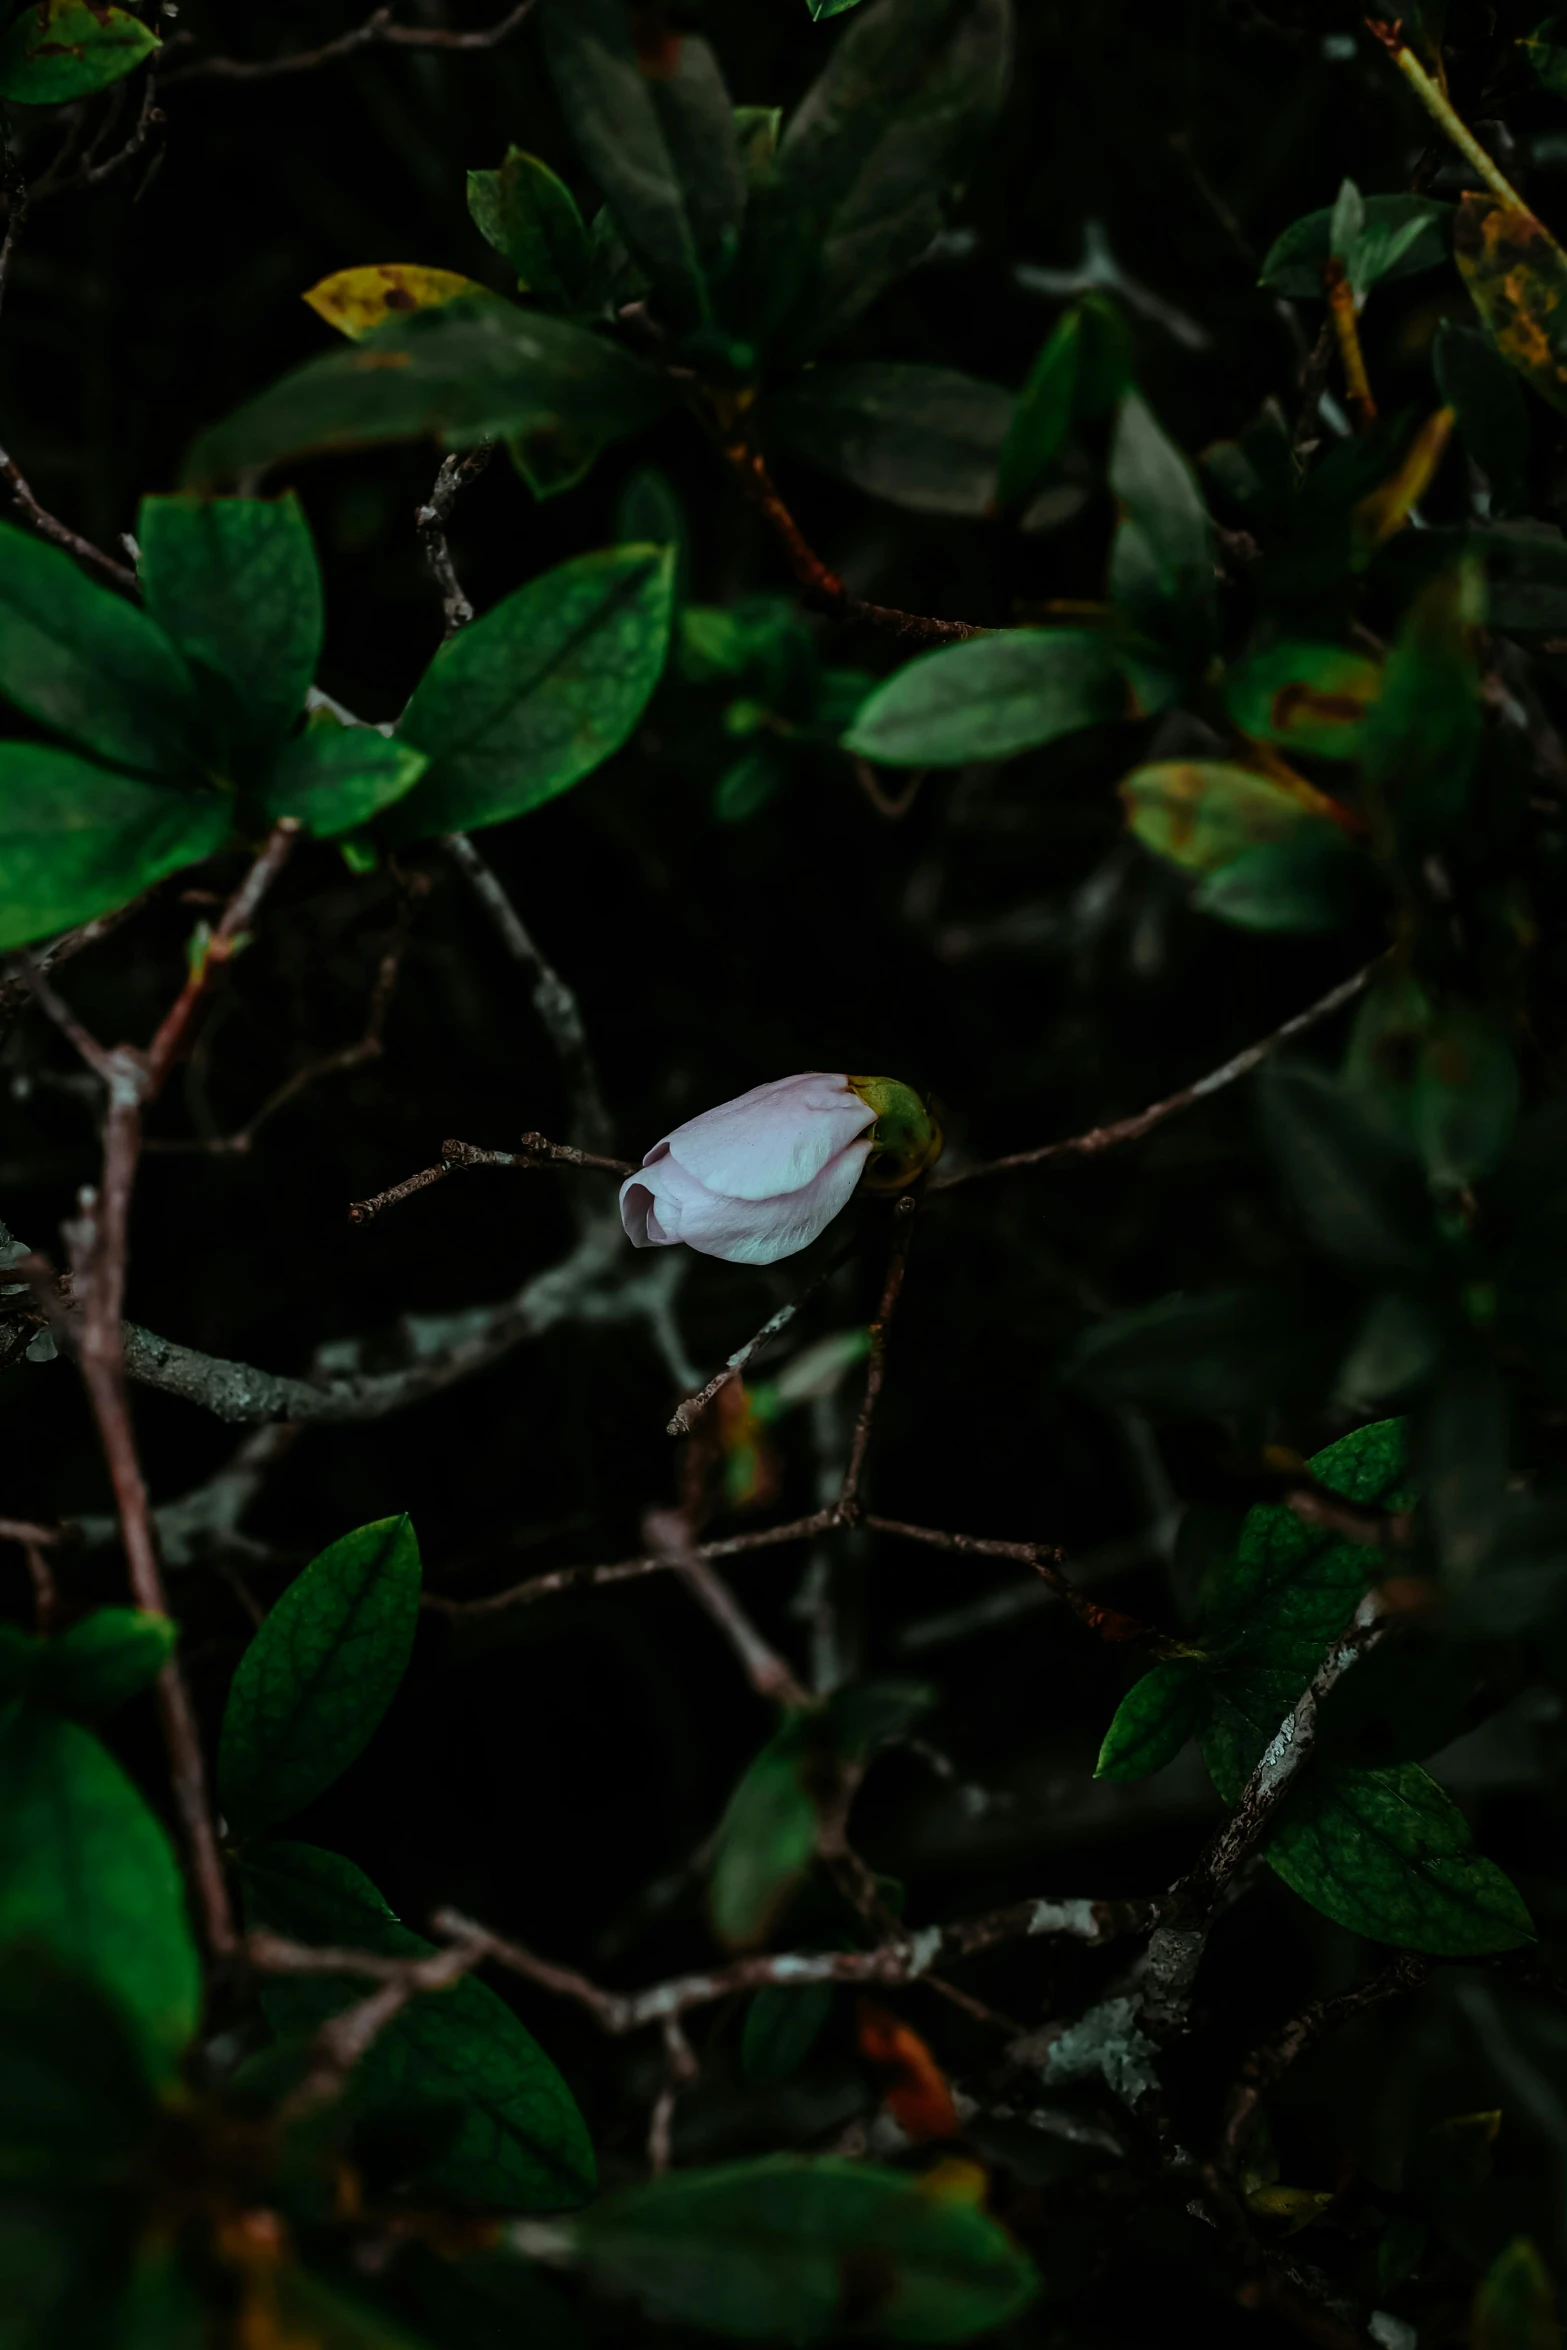 some leaves and a flower is shown in the dark